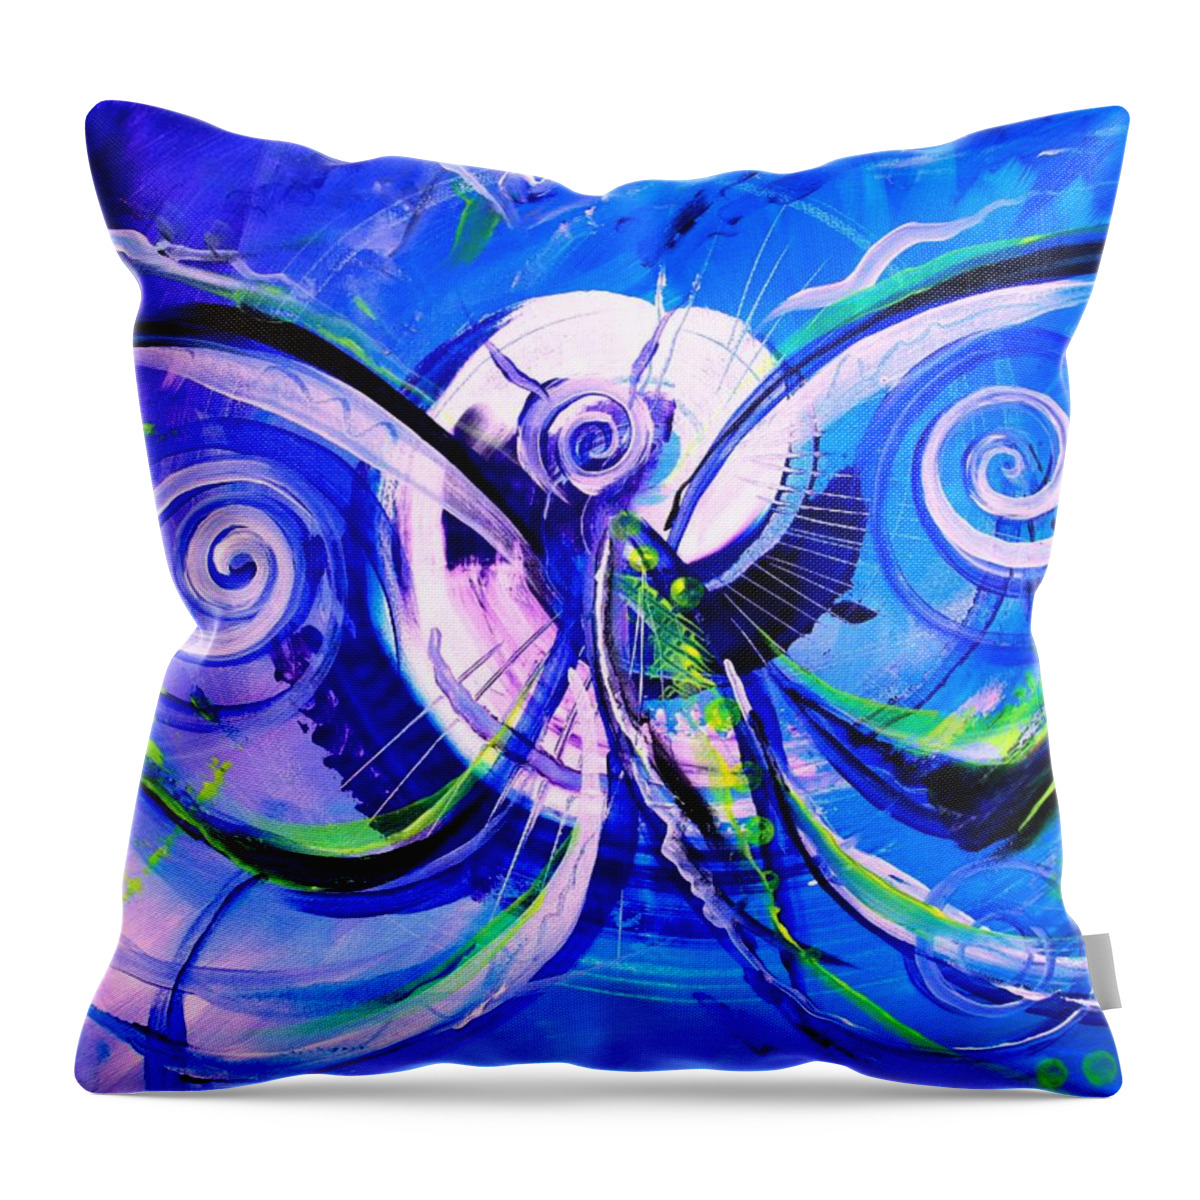 Butterfly Throw Pillow featuring the painting Butterfly Blue Violet by J Vincent Scarpace